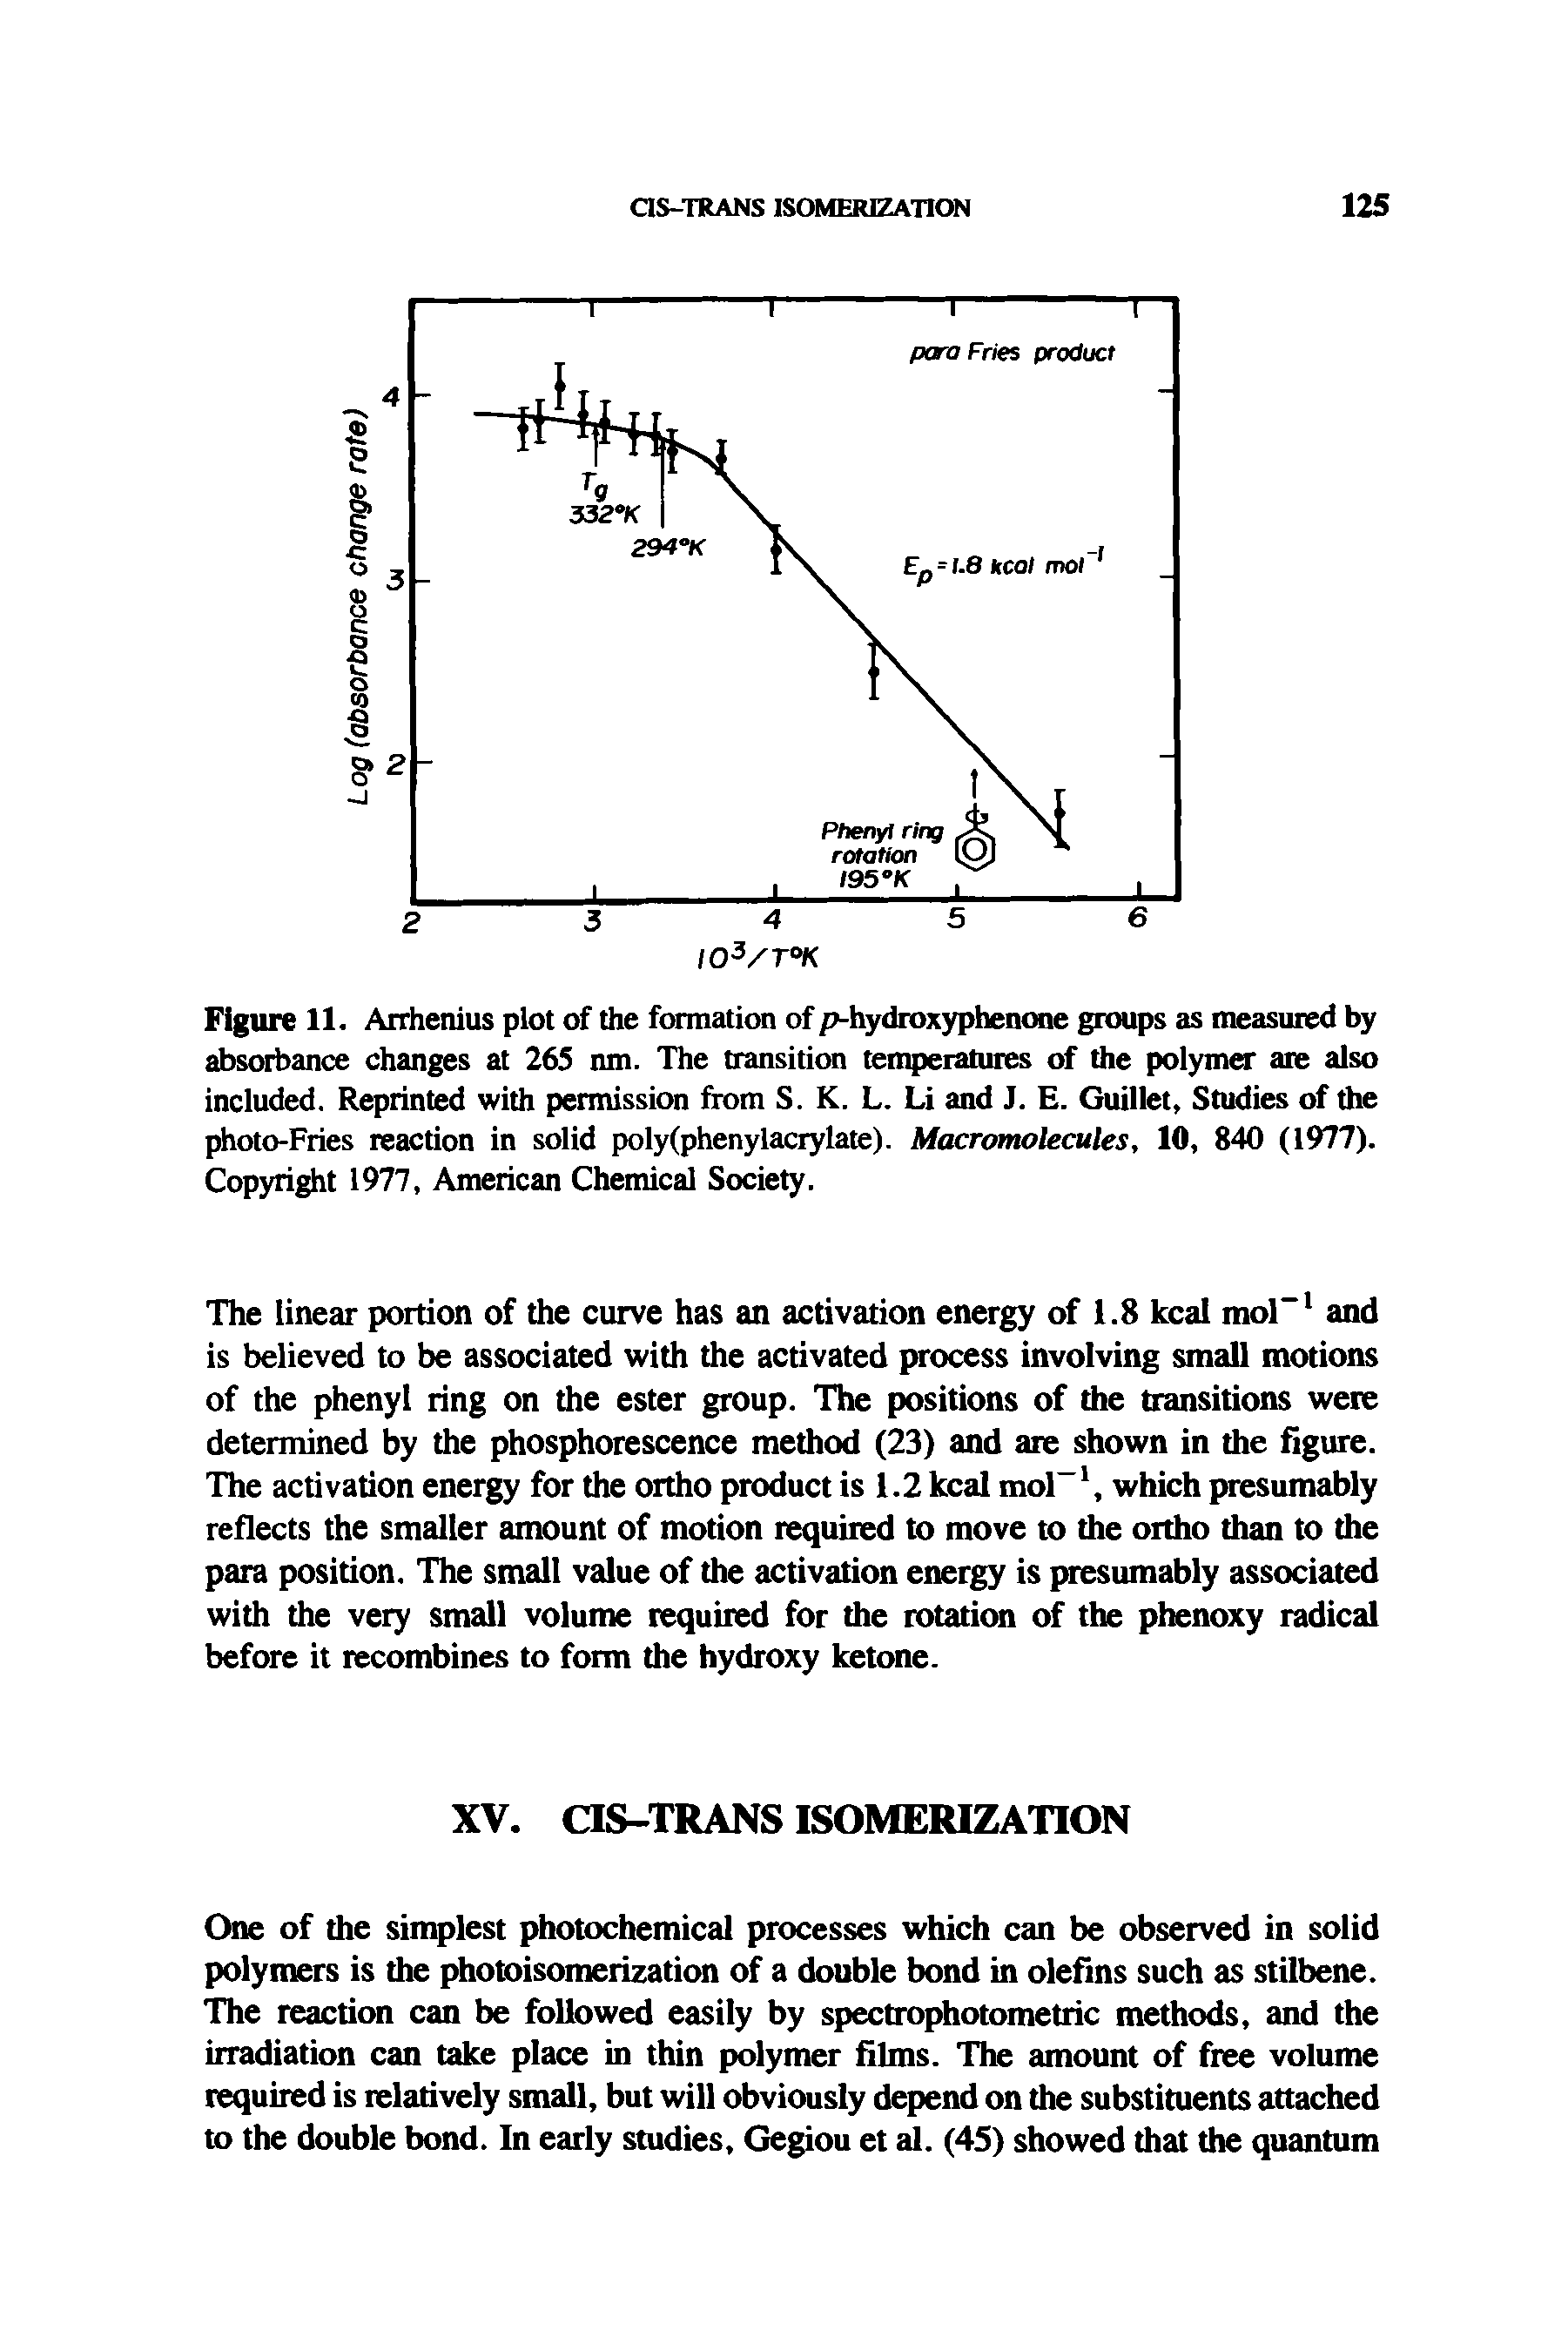 Figure 11. Arrhenius plot of the formation of hydroxyphenone groups as measured by absorbance changes at 265 nm. The transition tenqieratures of the polymer are also included. Reprinted with permission from S. K. L. Li and J. E. Guillet, Studies of the photo-Fries reaction in solid poly(phenylacrylate). Macromolecules, 10, 840 (1977). Copyright 1977, American Chemical Society.